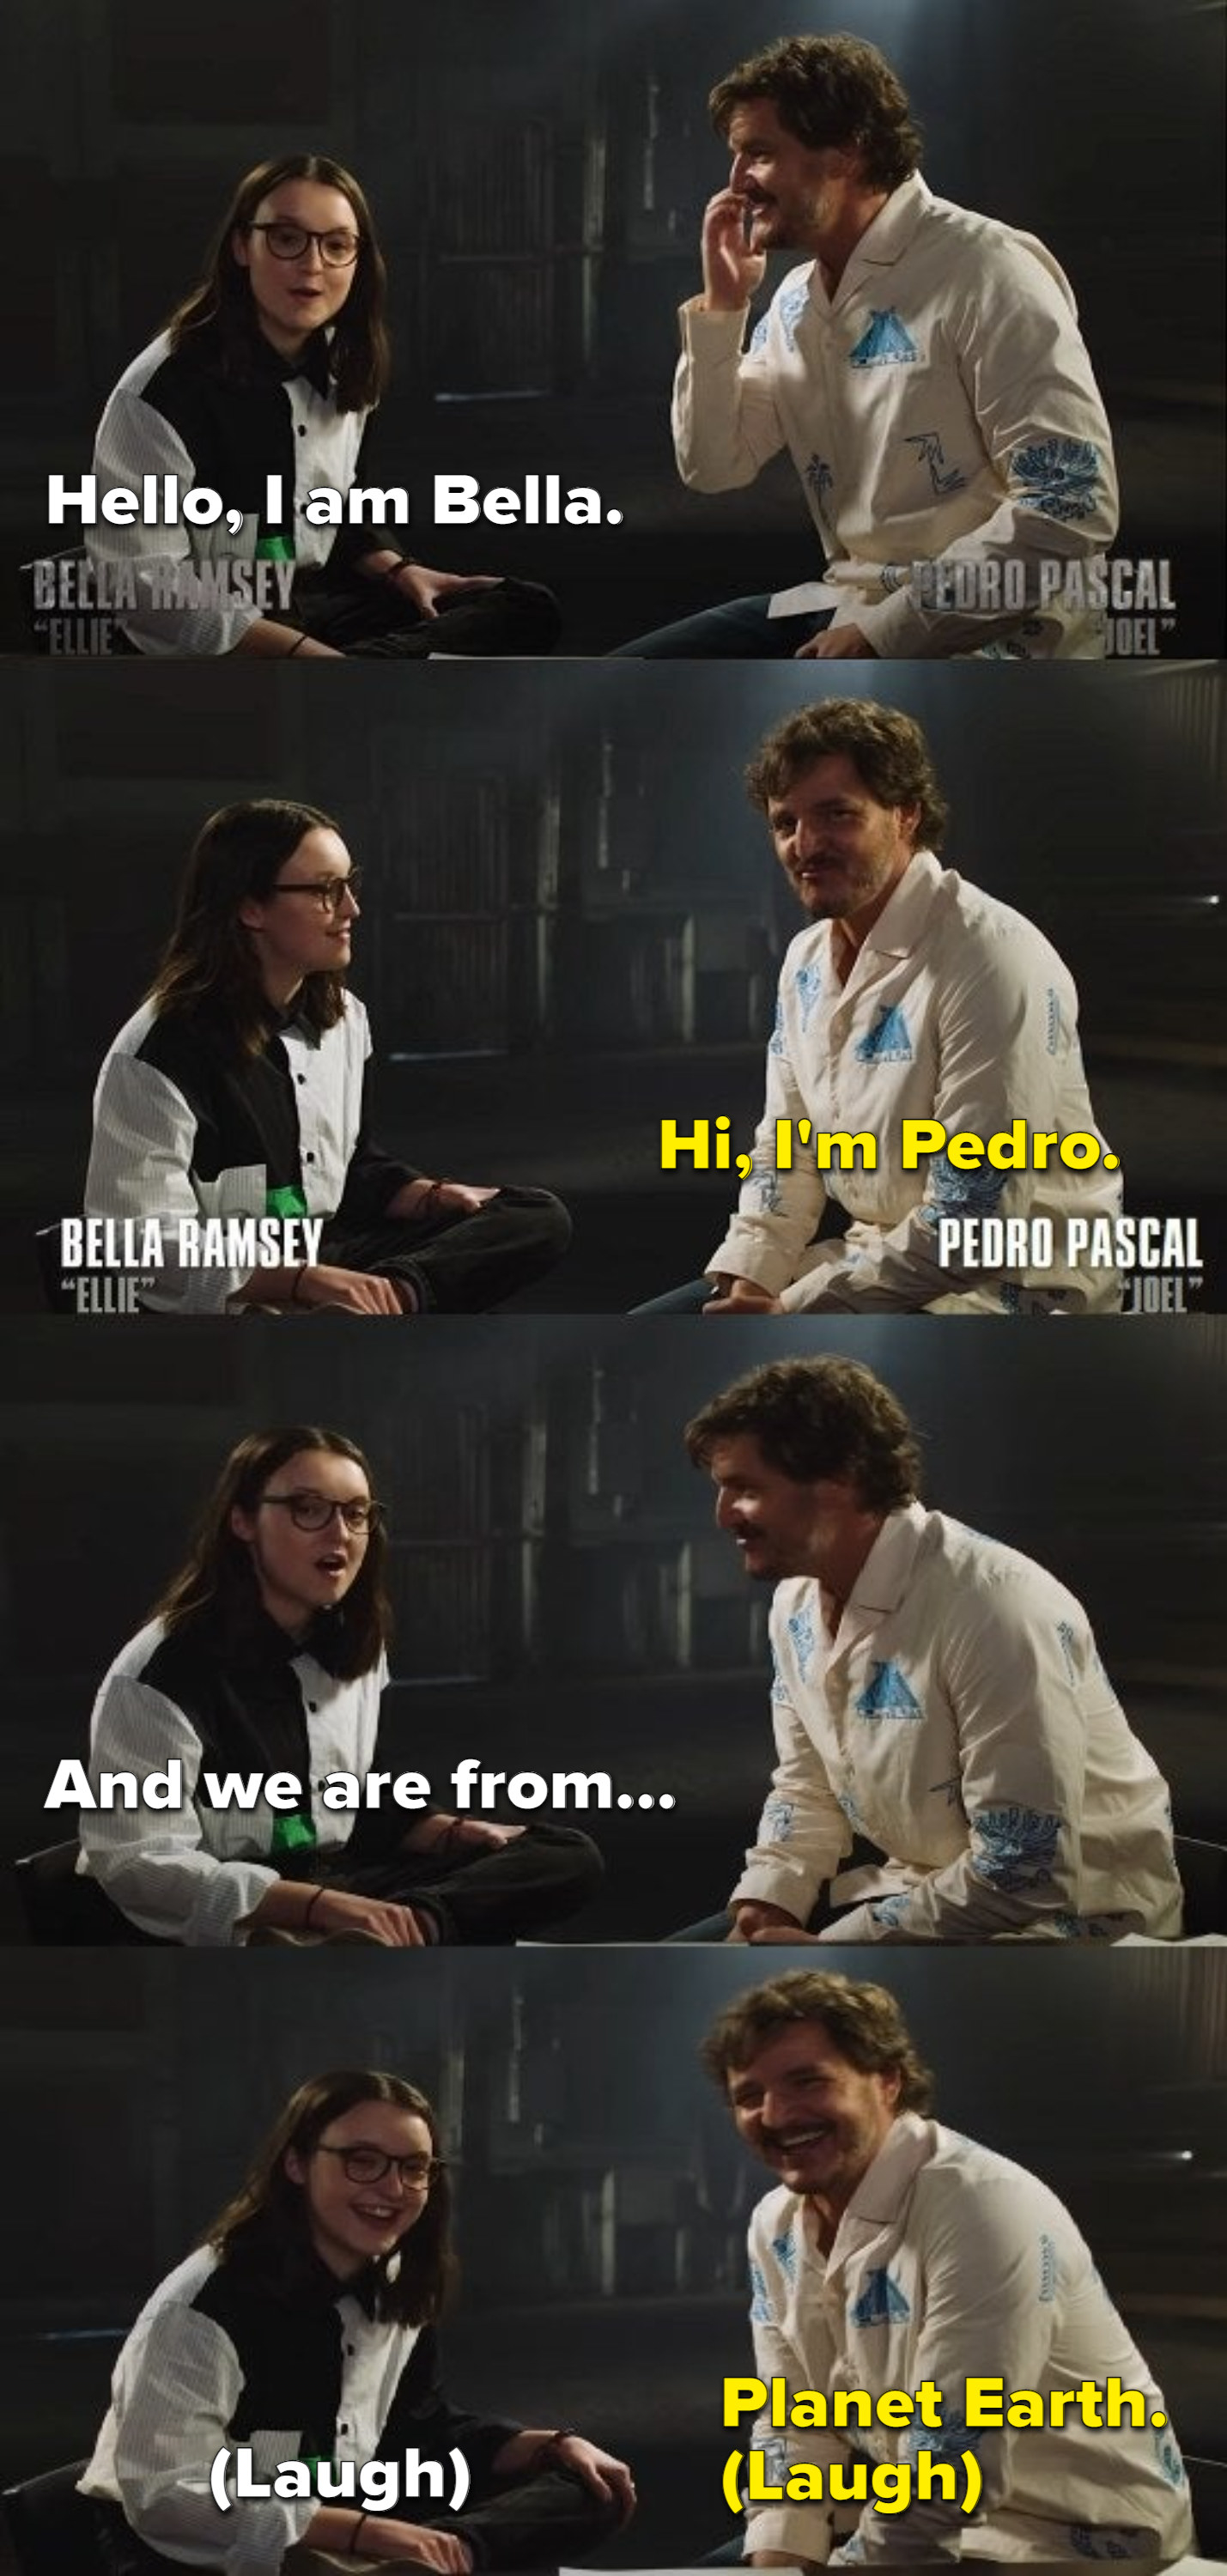 Pedro Pascal and Bella Ramsey introducing themselves